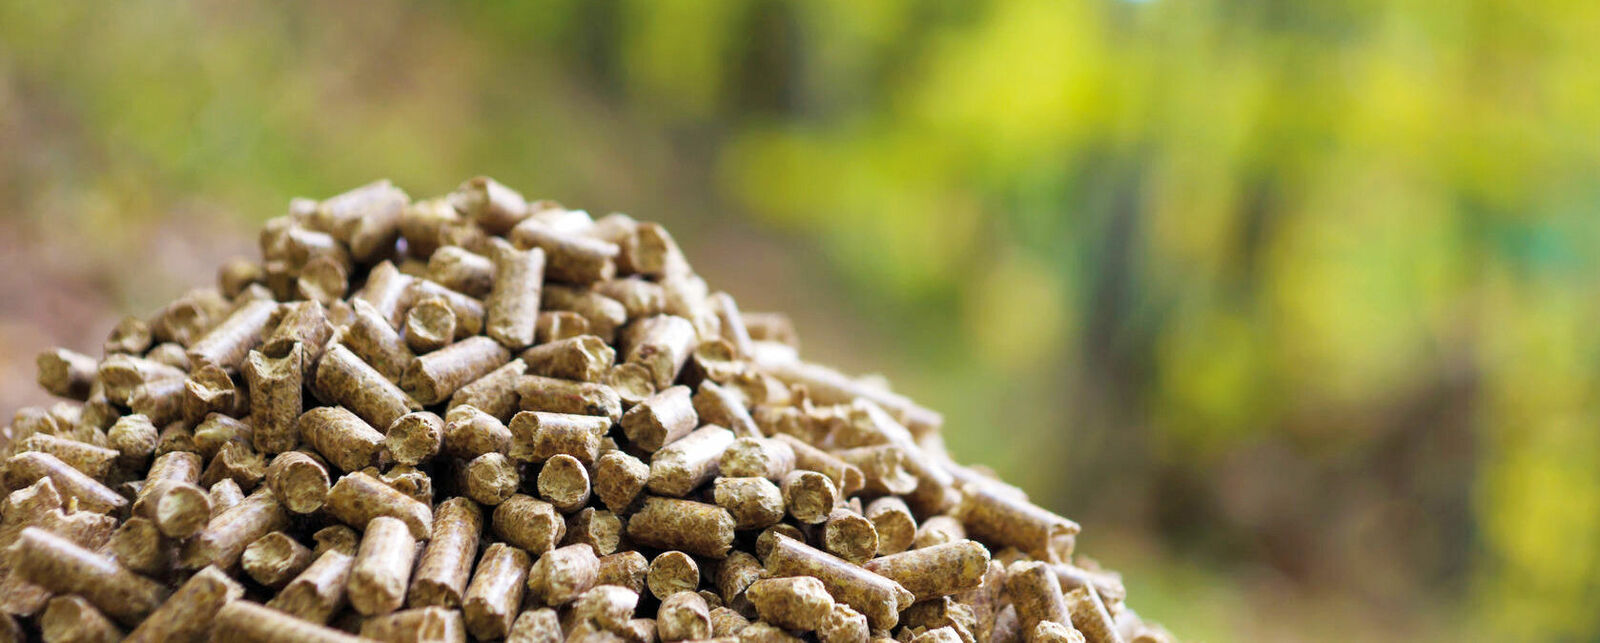 Wood pellets in the forest